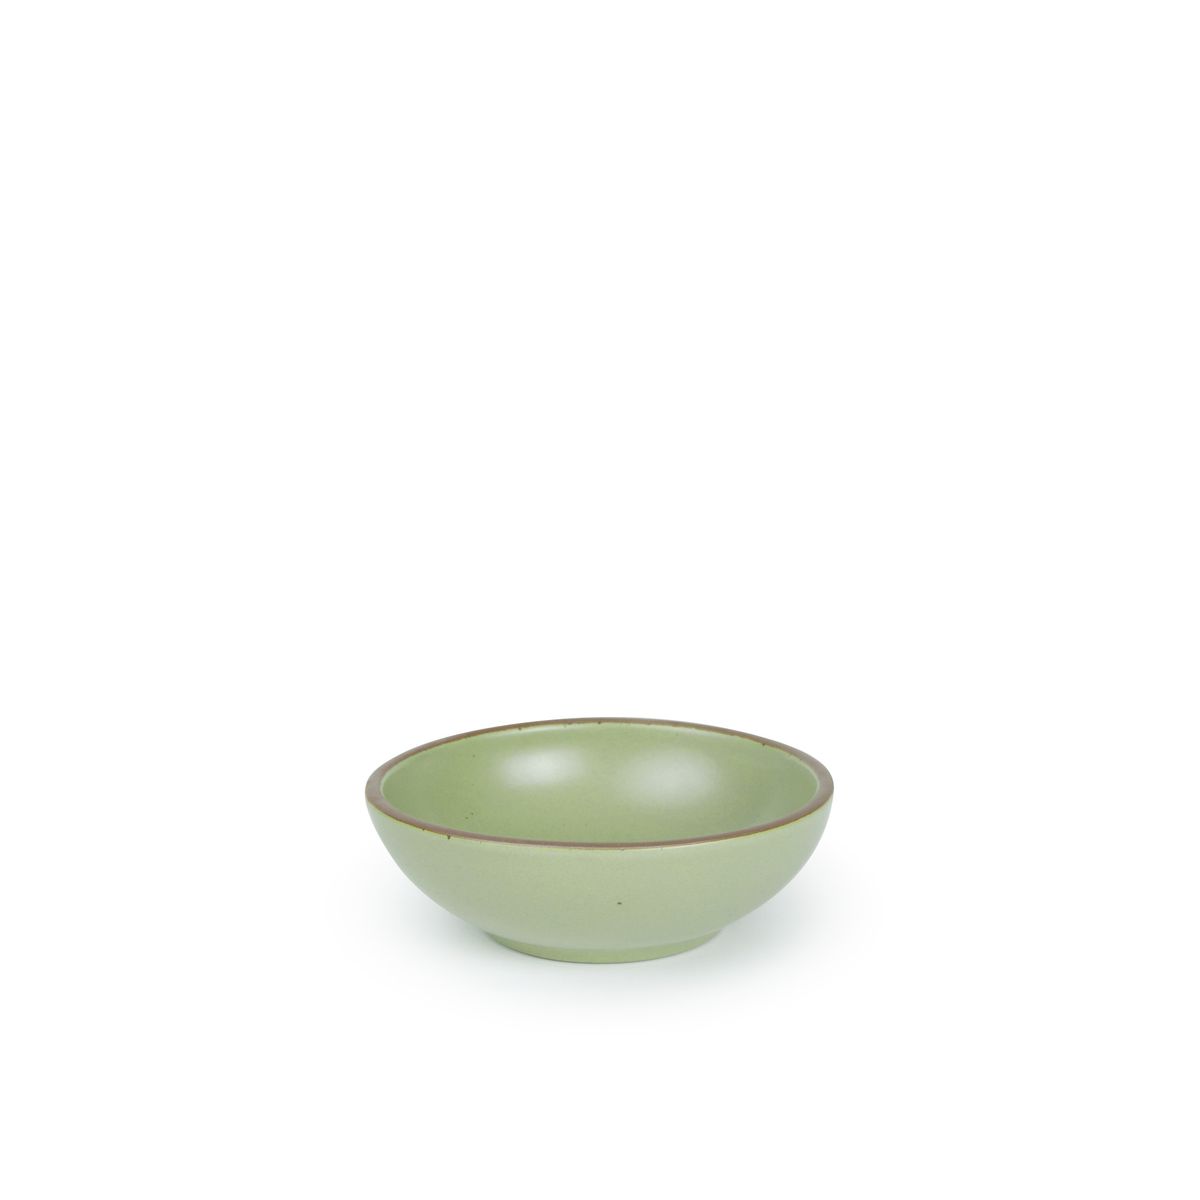 A small shallow ceramic bowl in a calming sage green color featuring iron speckles and an unglazed rim